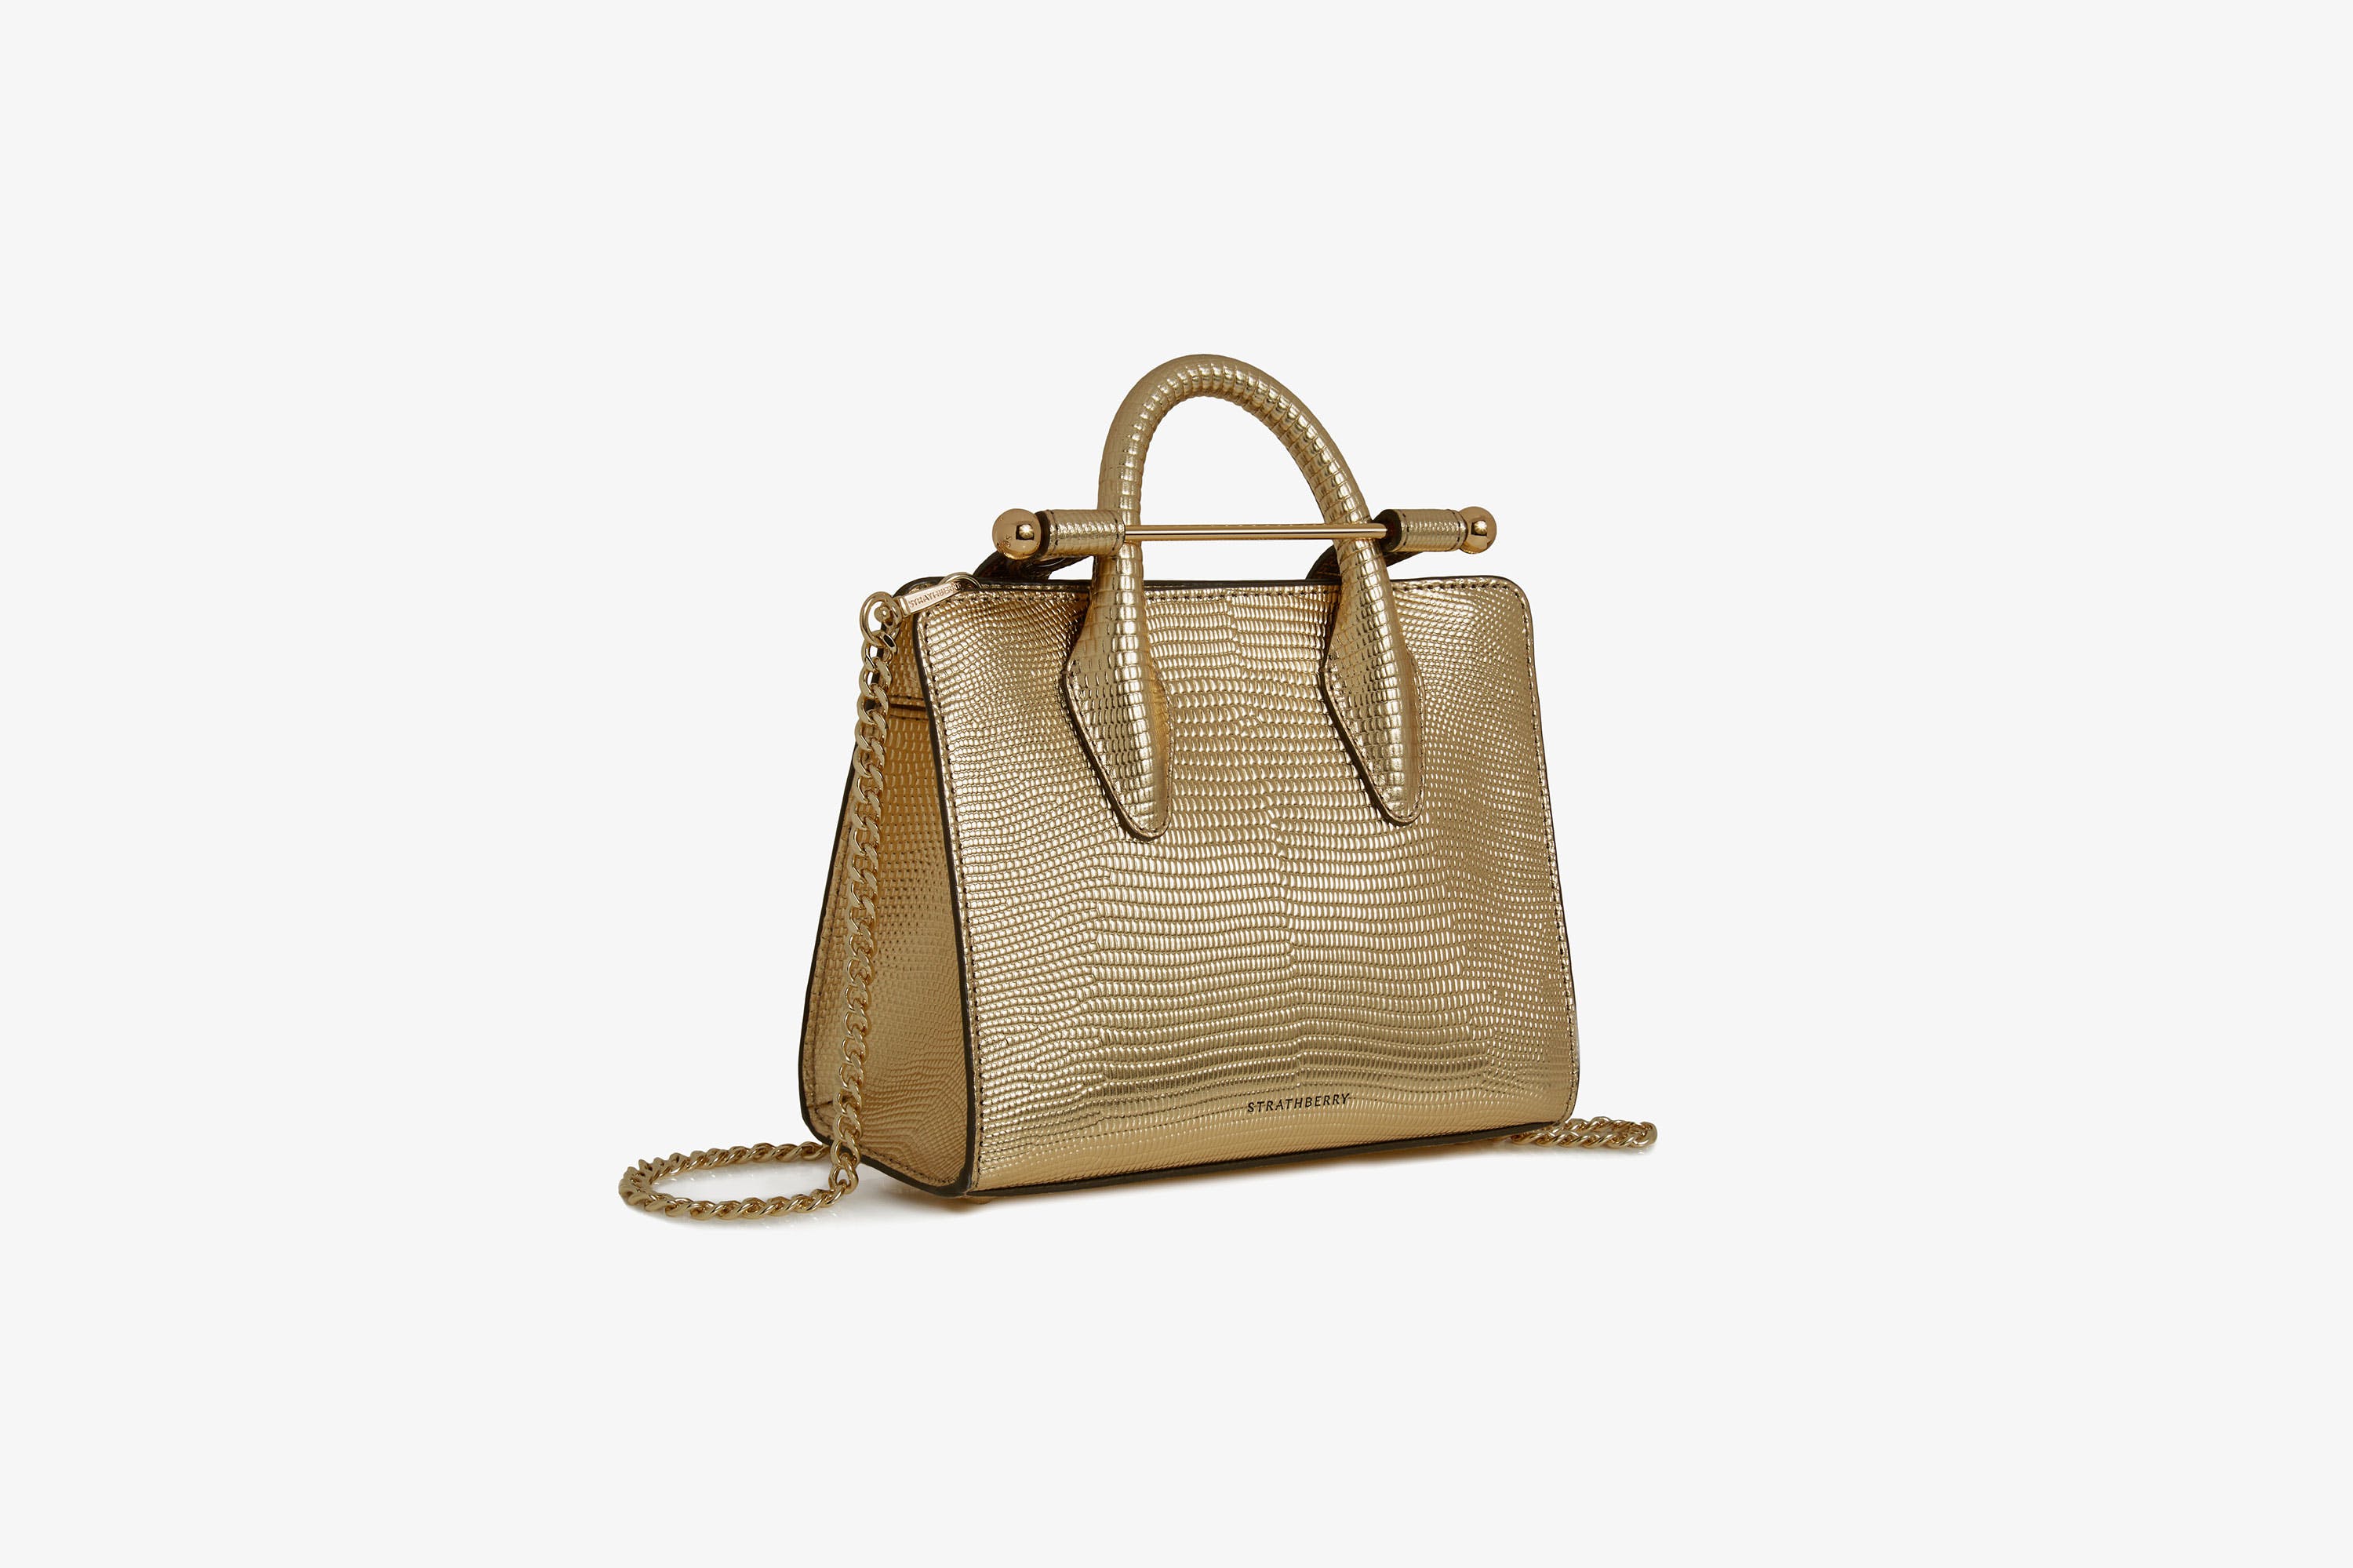 The Strathberry Nano Tote - Top Handle Leather Mini Tote Bag - Gold